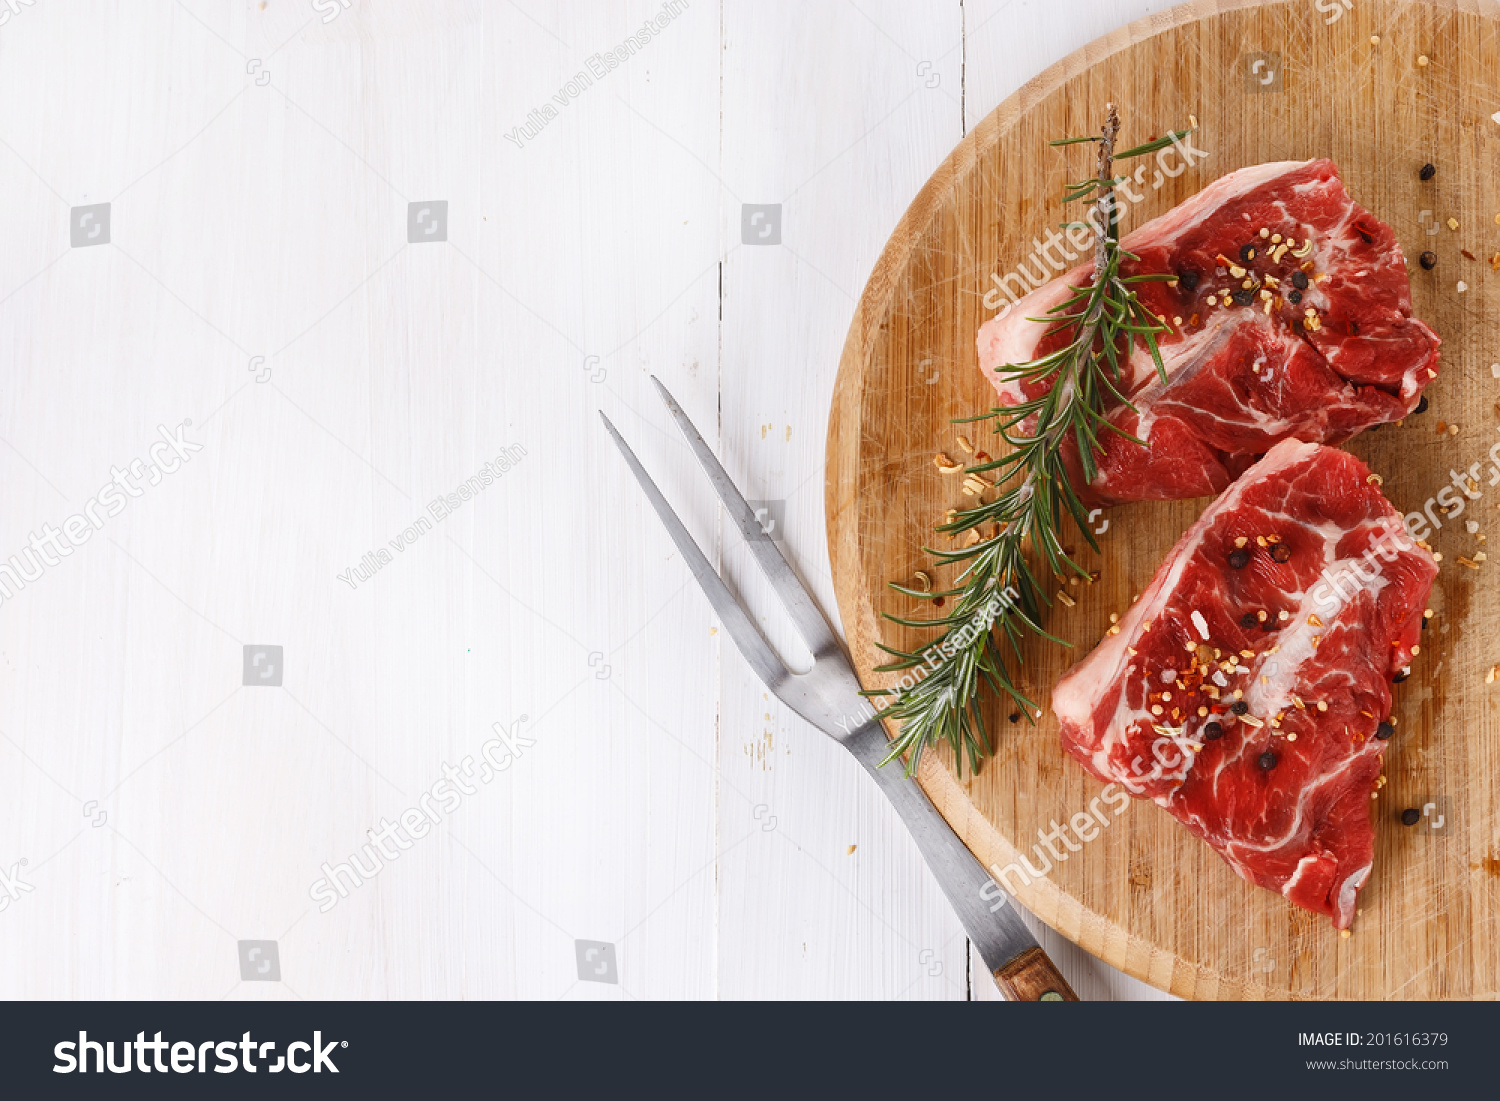 Background with red meat and rosemary over white wooden table. Top view #201616379